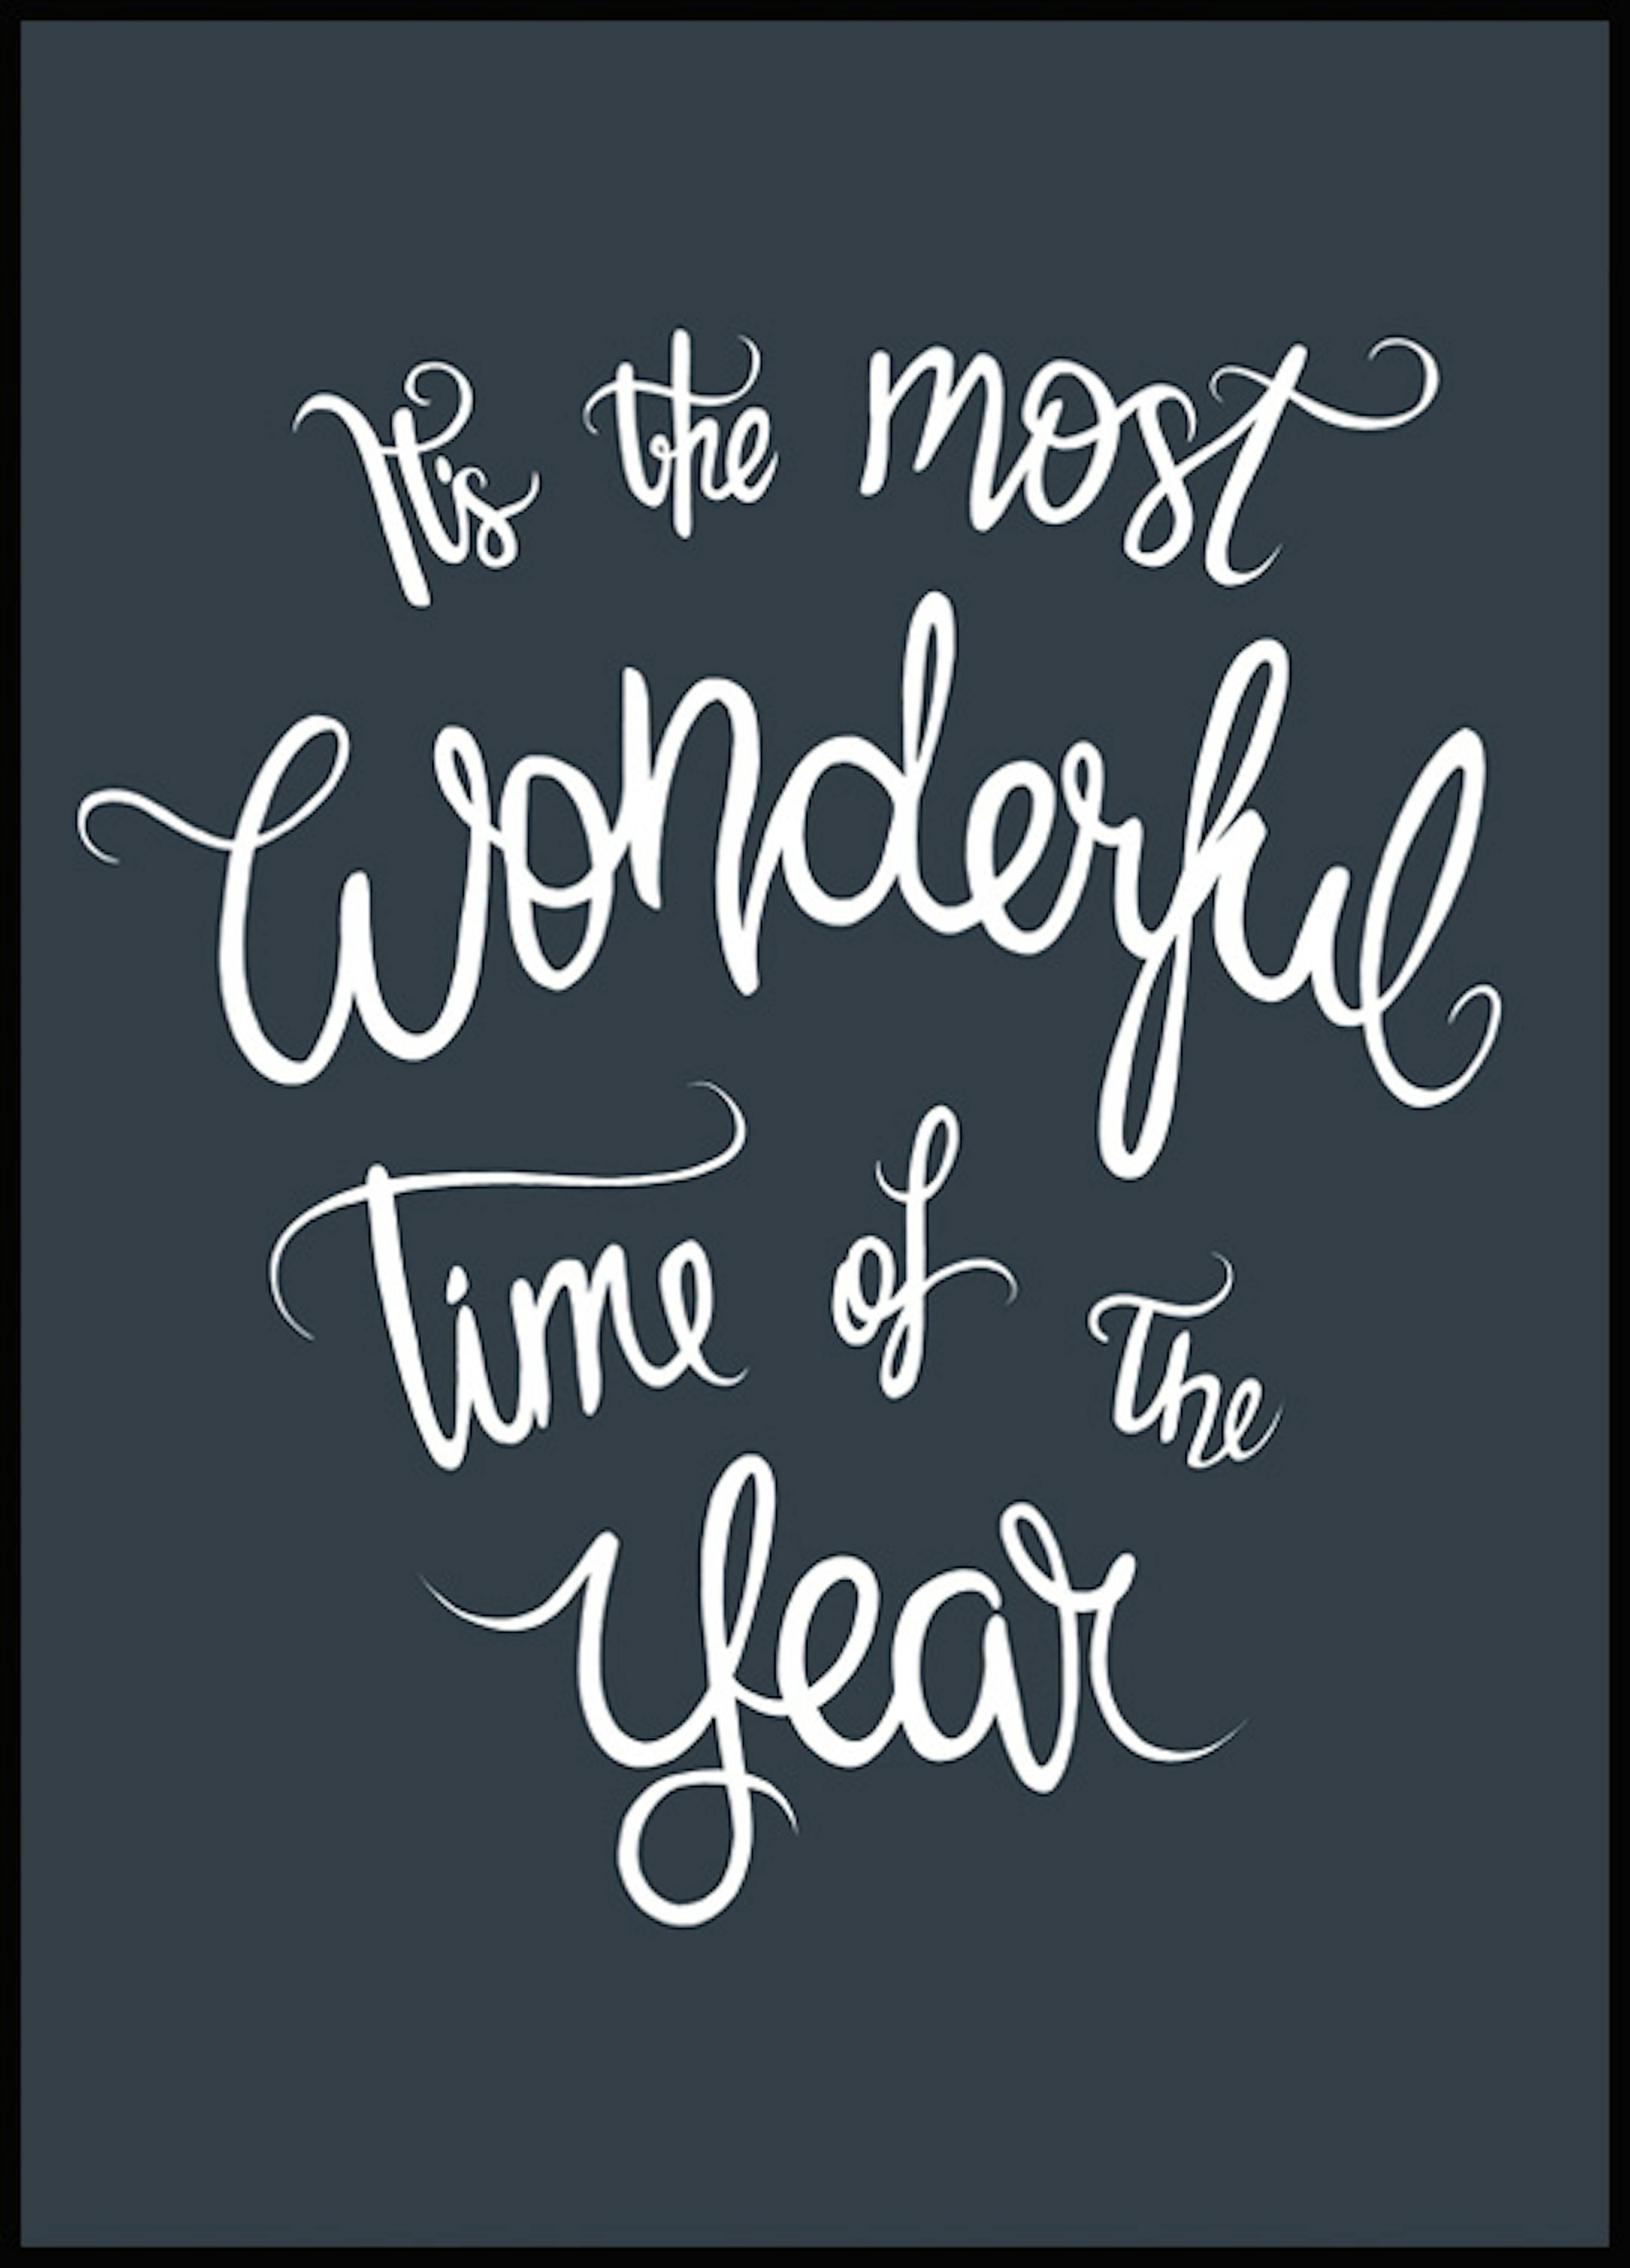 The Most Wonderful Time Poster 0